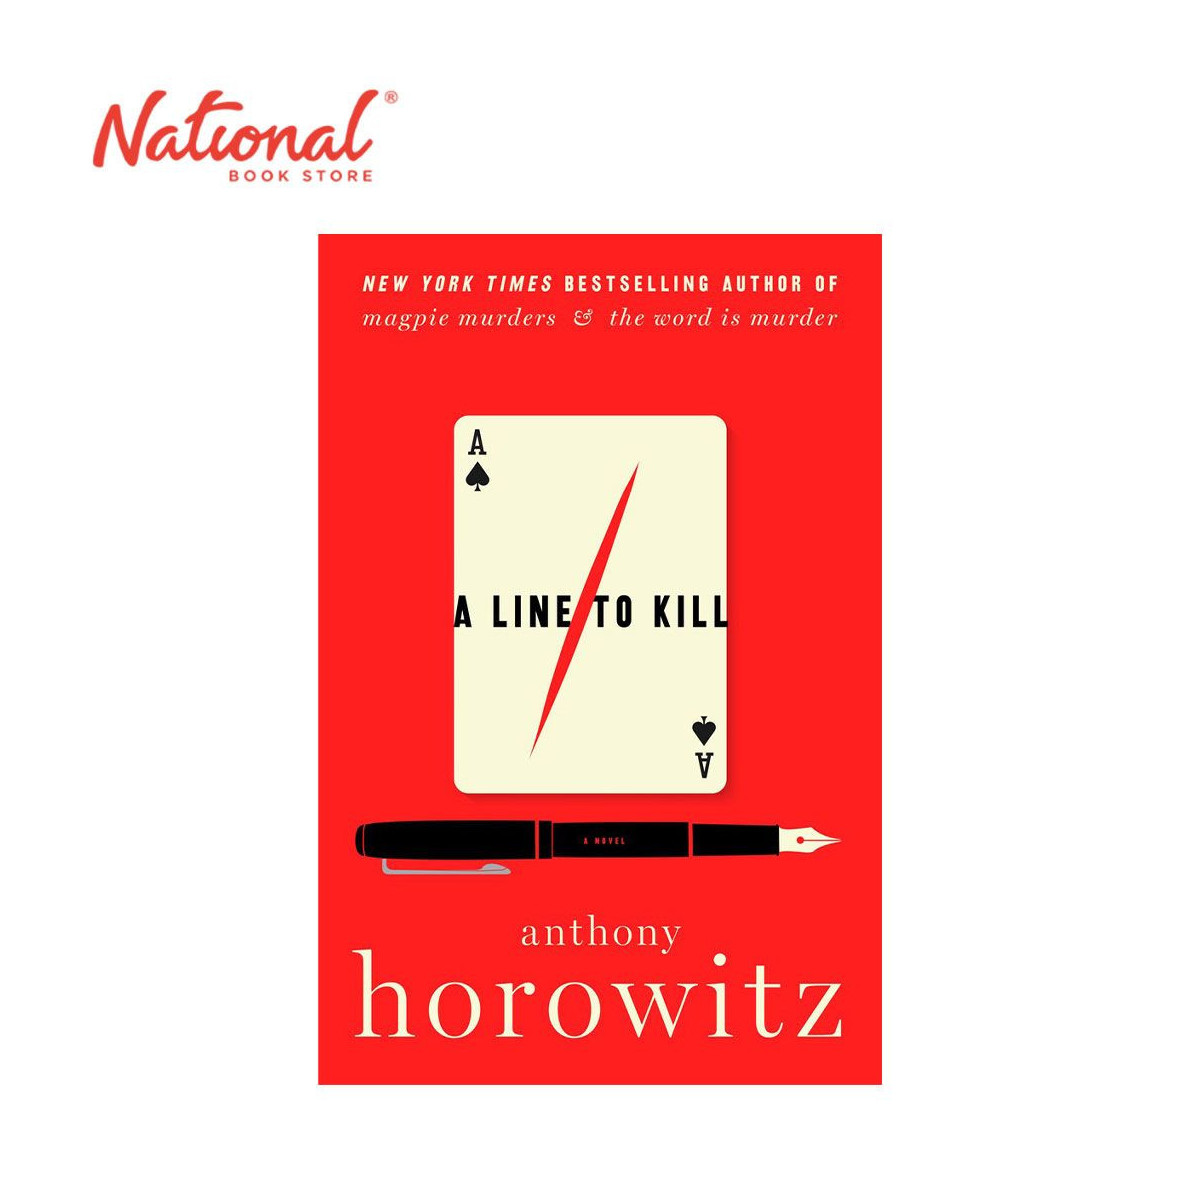 A Hawthorne and Horowitz Mystery 3: A Line To Kill by Anthony Horowitz - Hardcover - Thriller